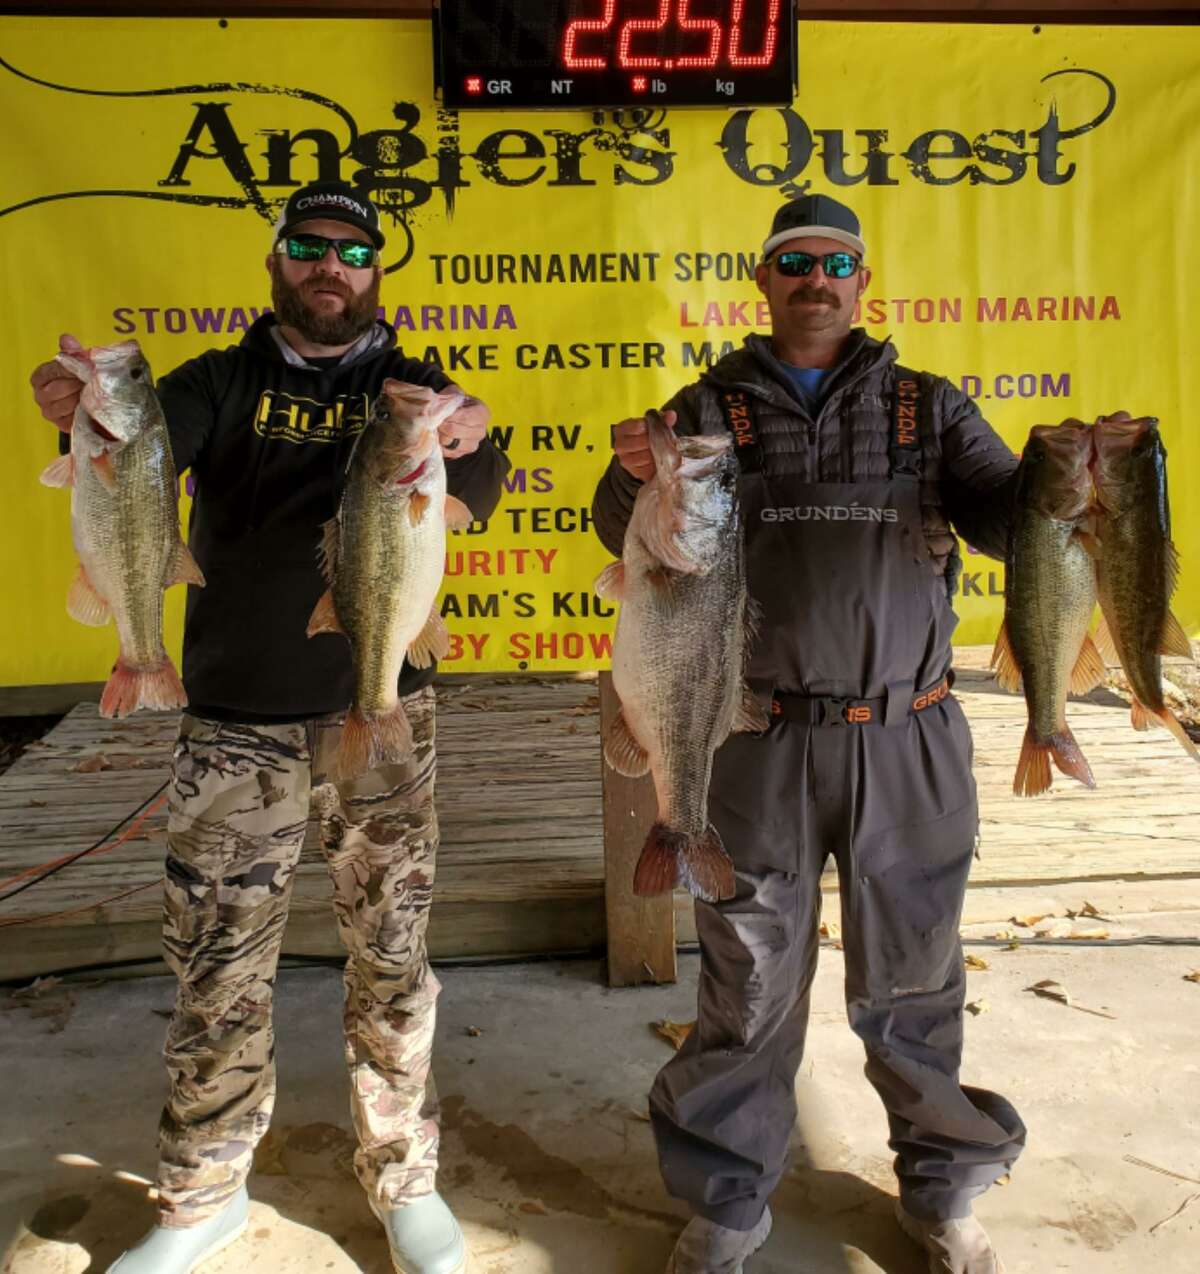 Brad Ferraro and Kegan Campbell won the Anglers Quest Team Tournament #2 with five fish weighing 22.50 pounds.